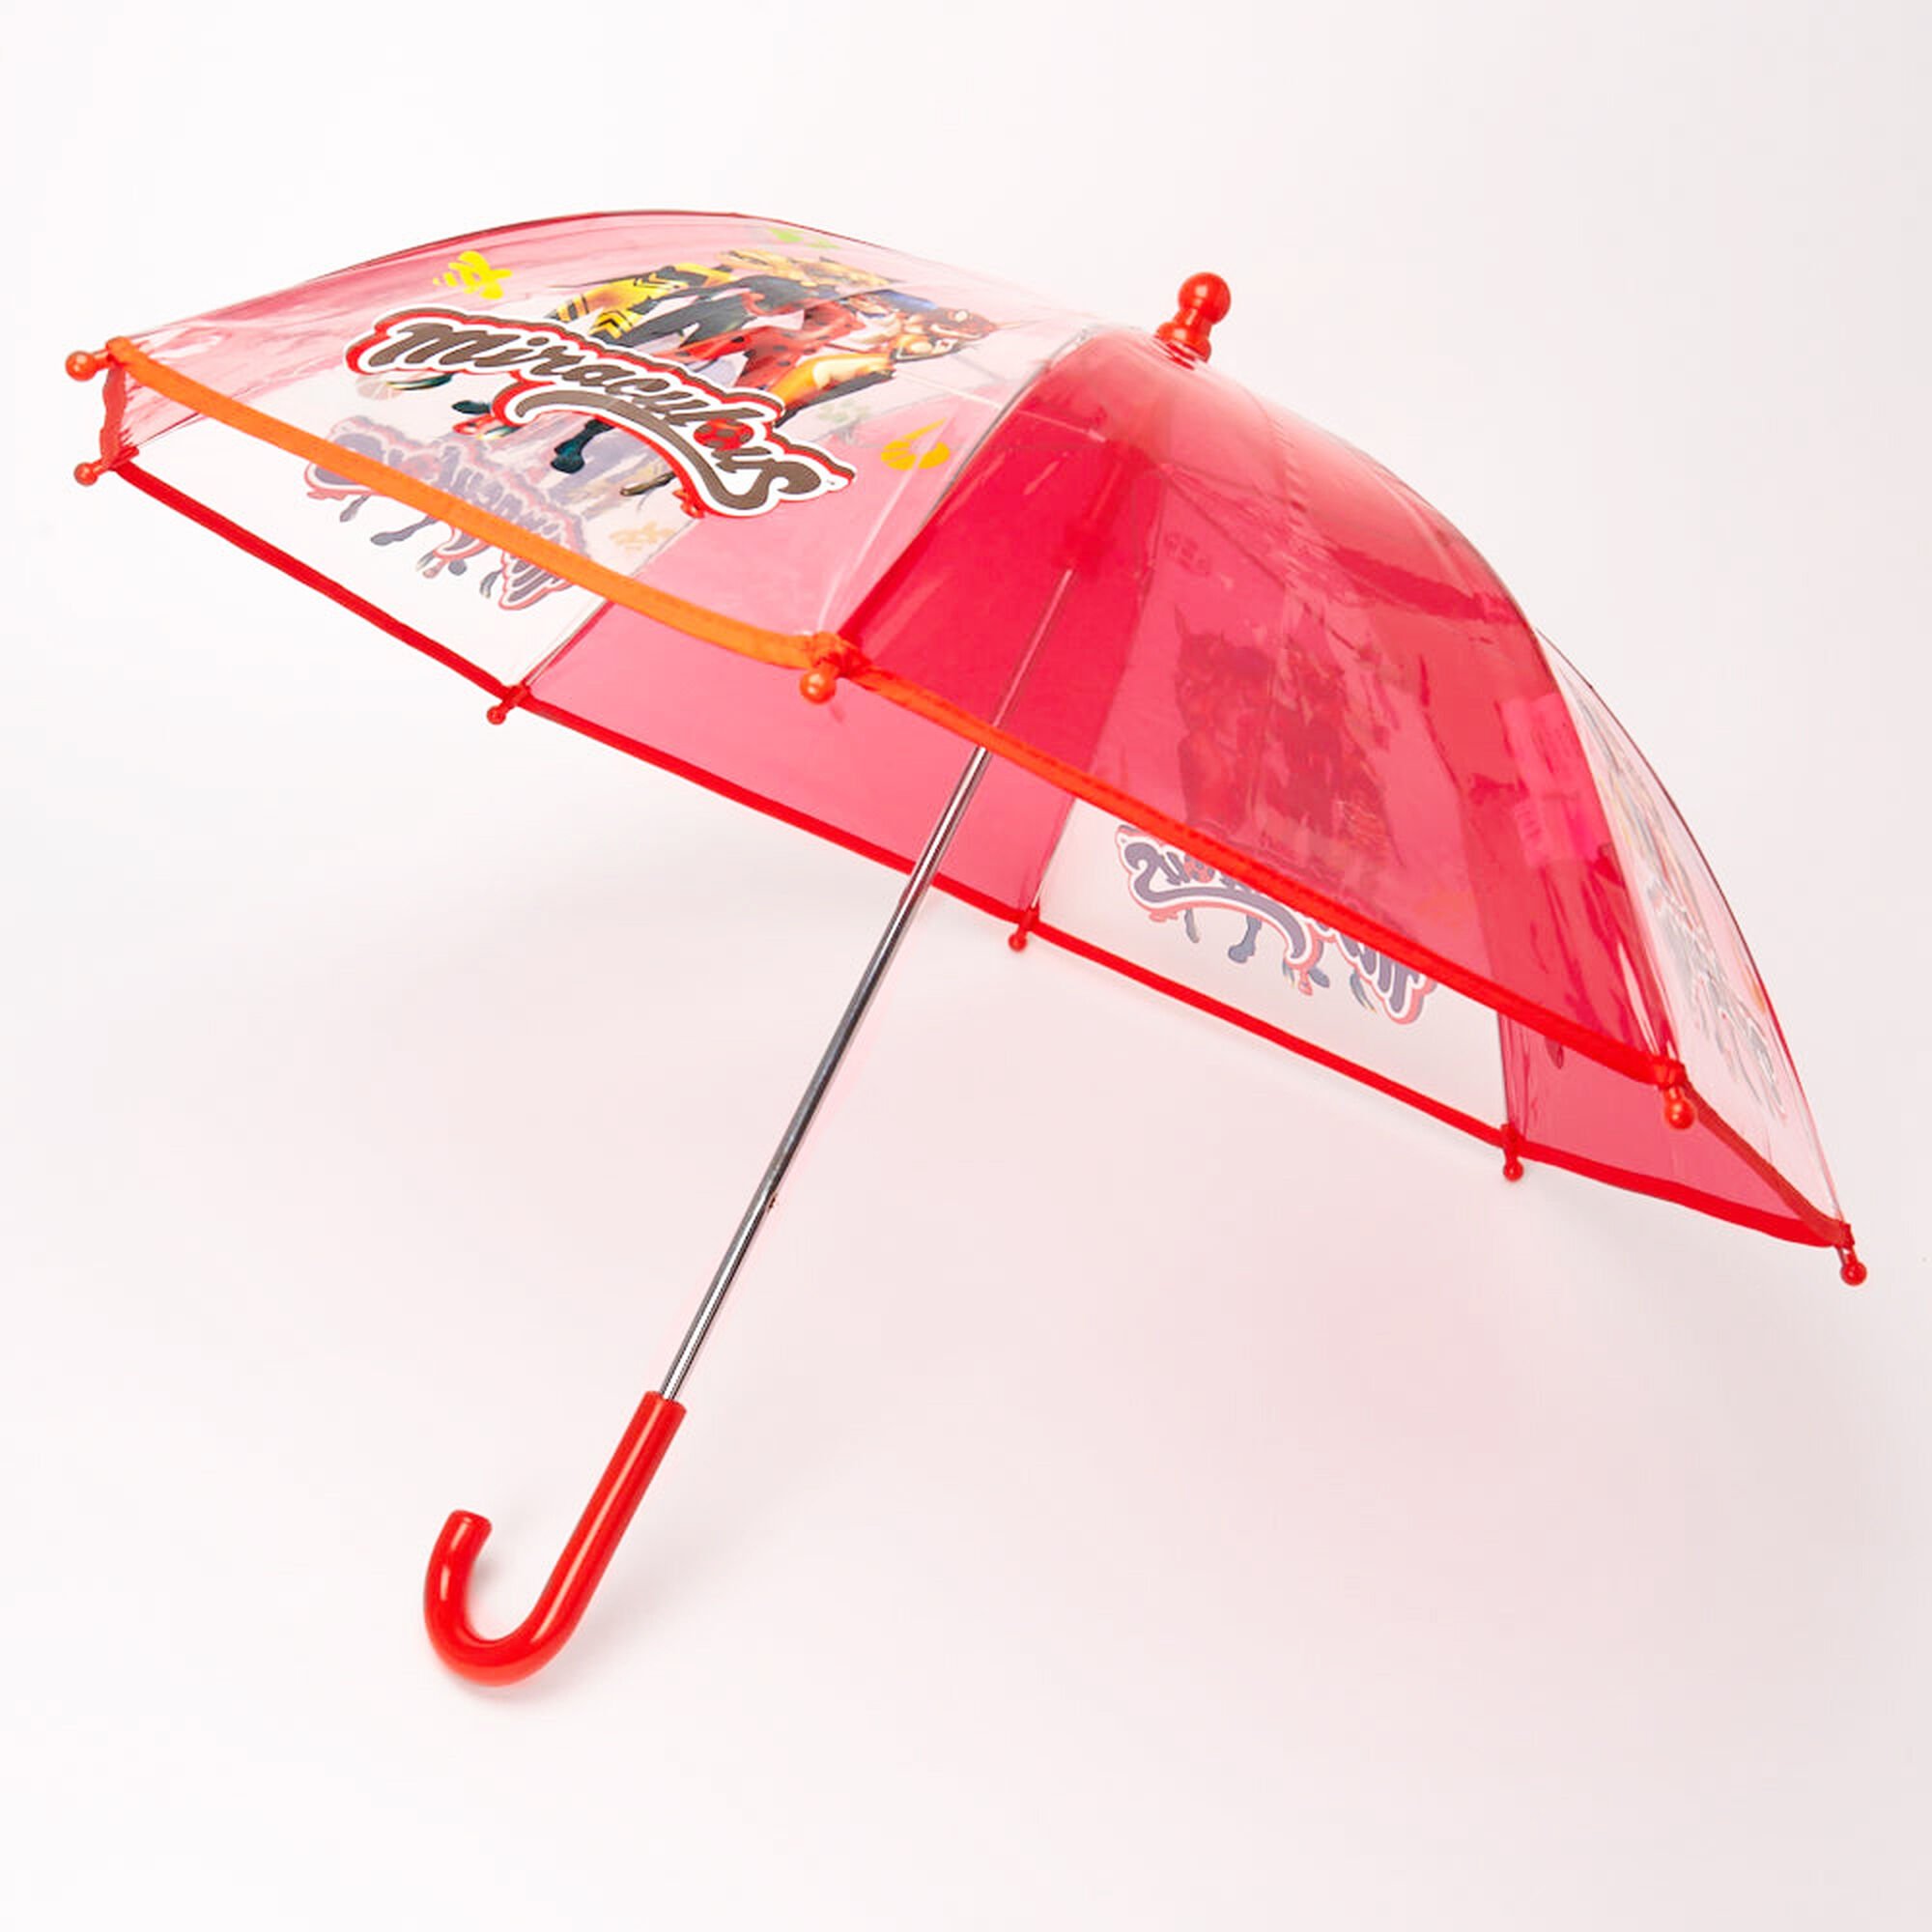 View Claires Miraculous Plastic Umbrella Red information